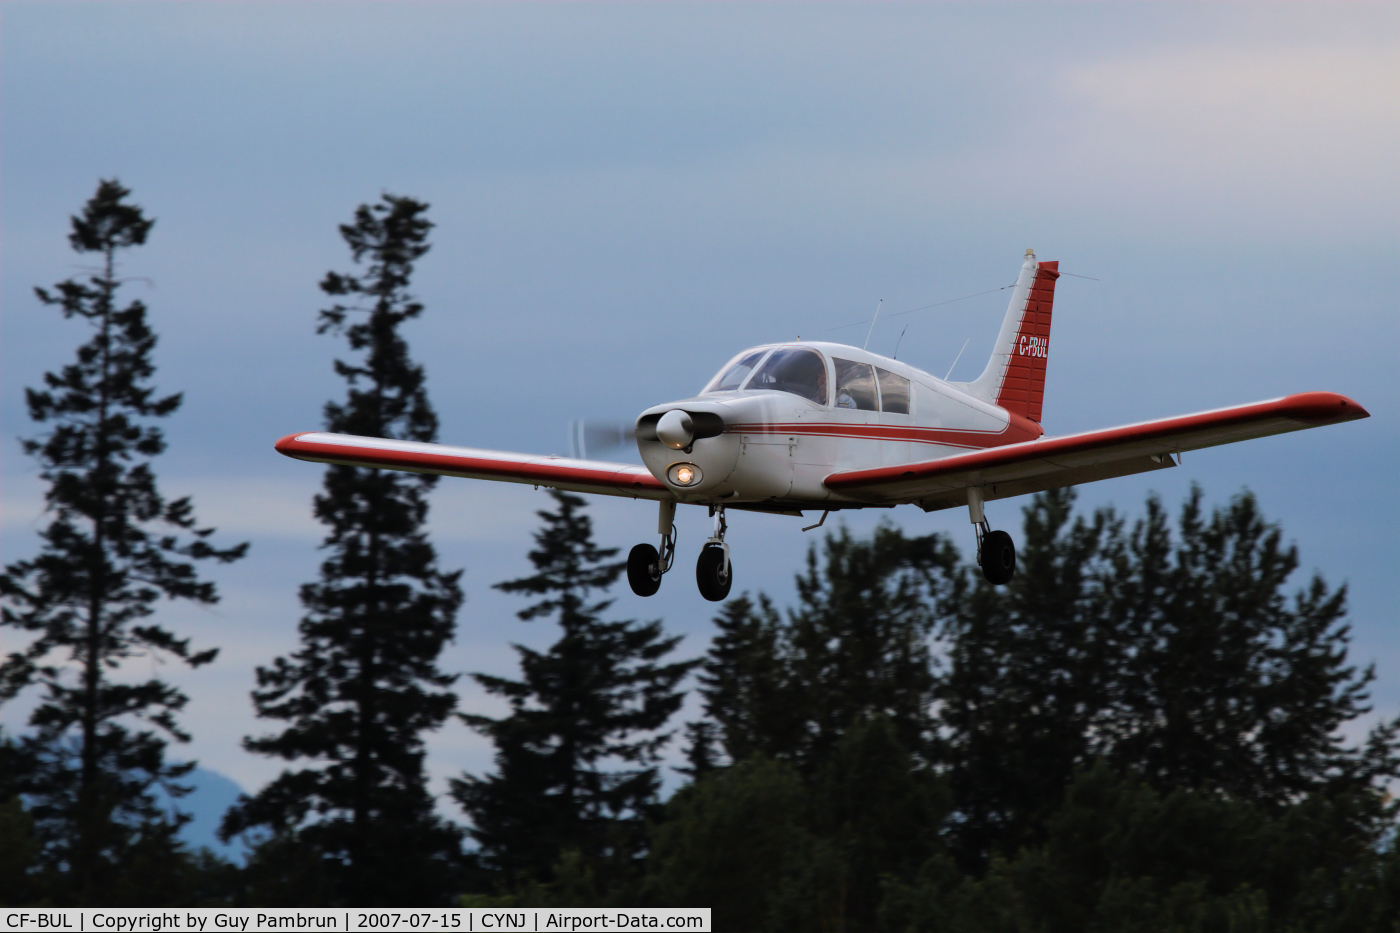 CF-BUL, 1973 Piper PA-28-140 C/N 28-7325239, Just about down